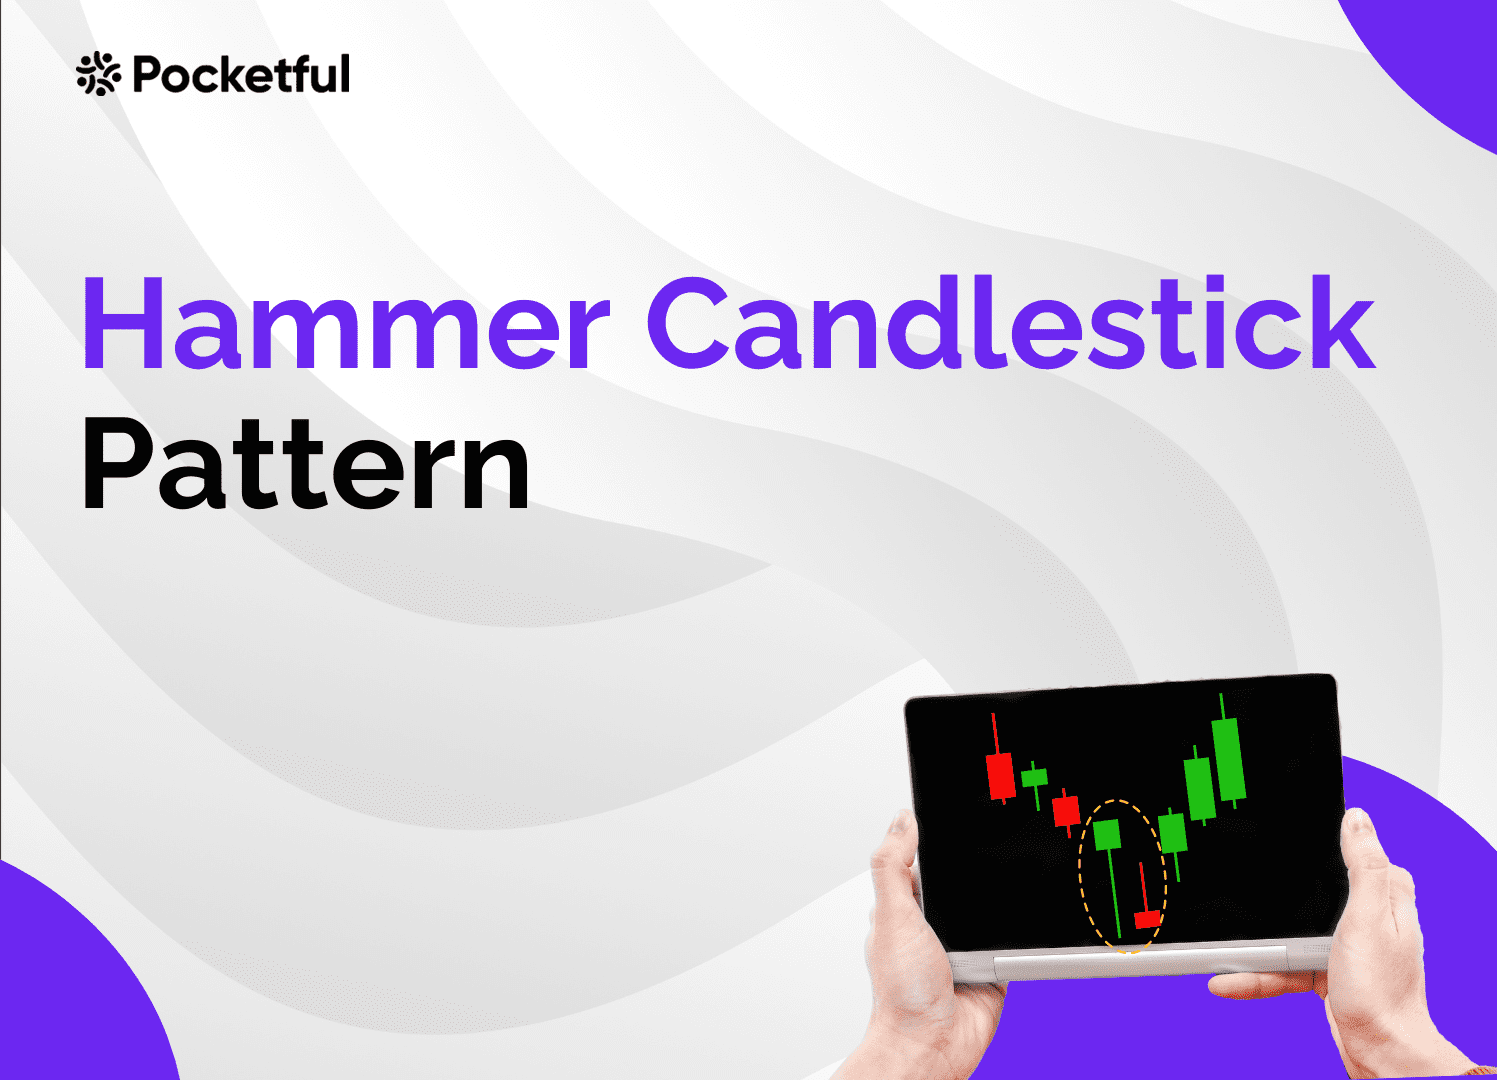 What is Hammer Candlestick Pattern? 